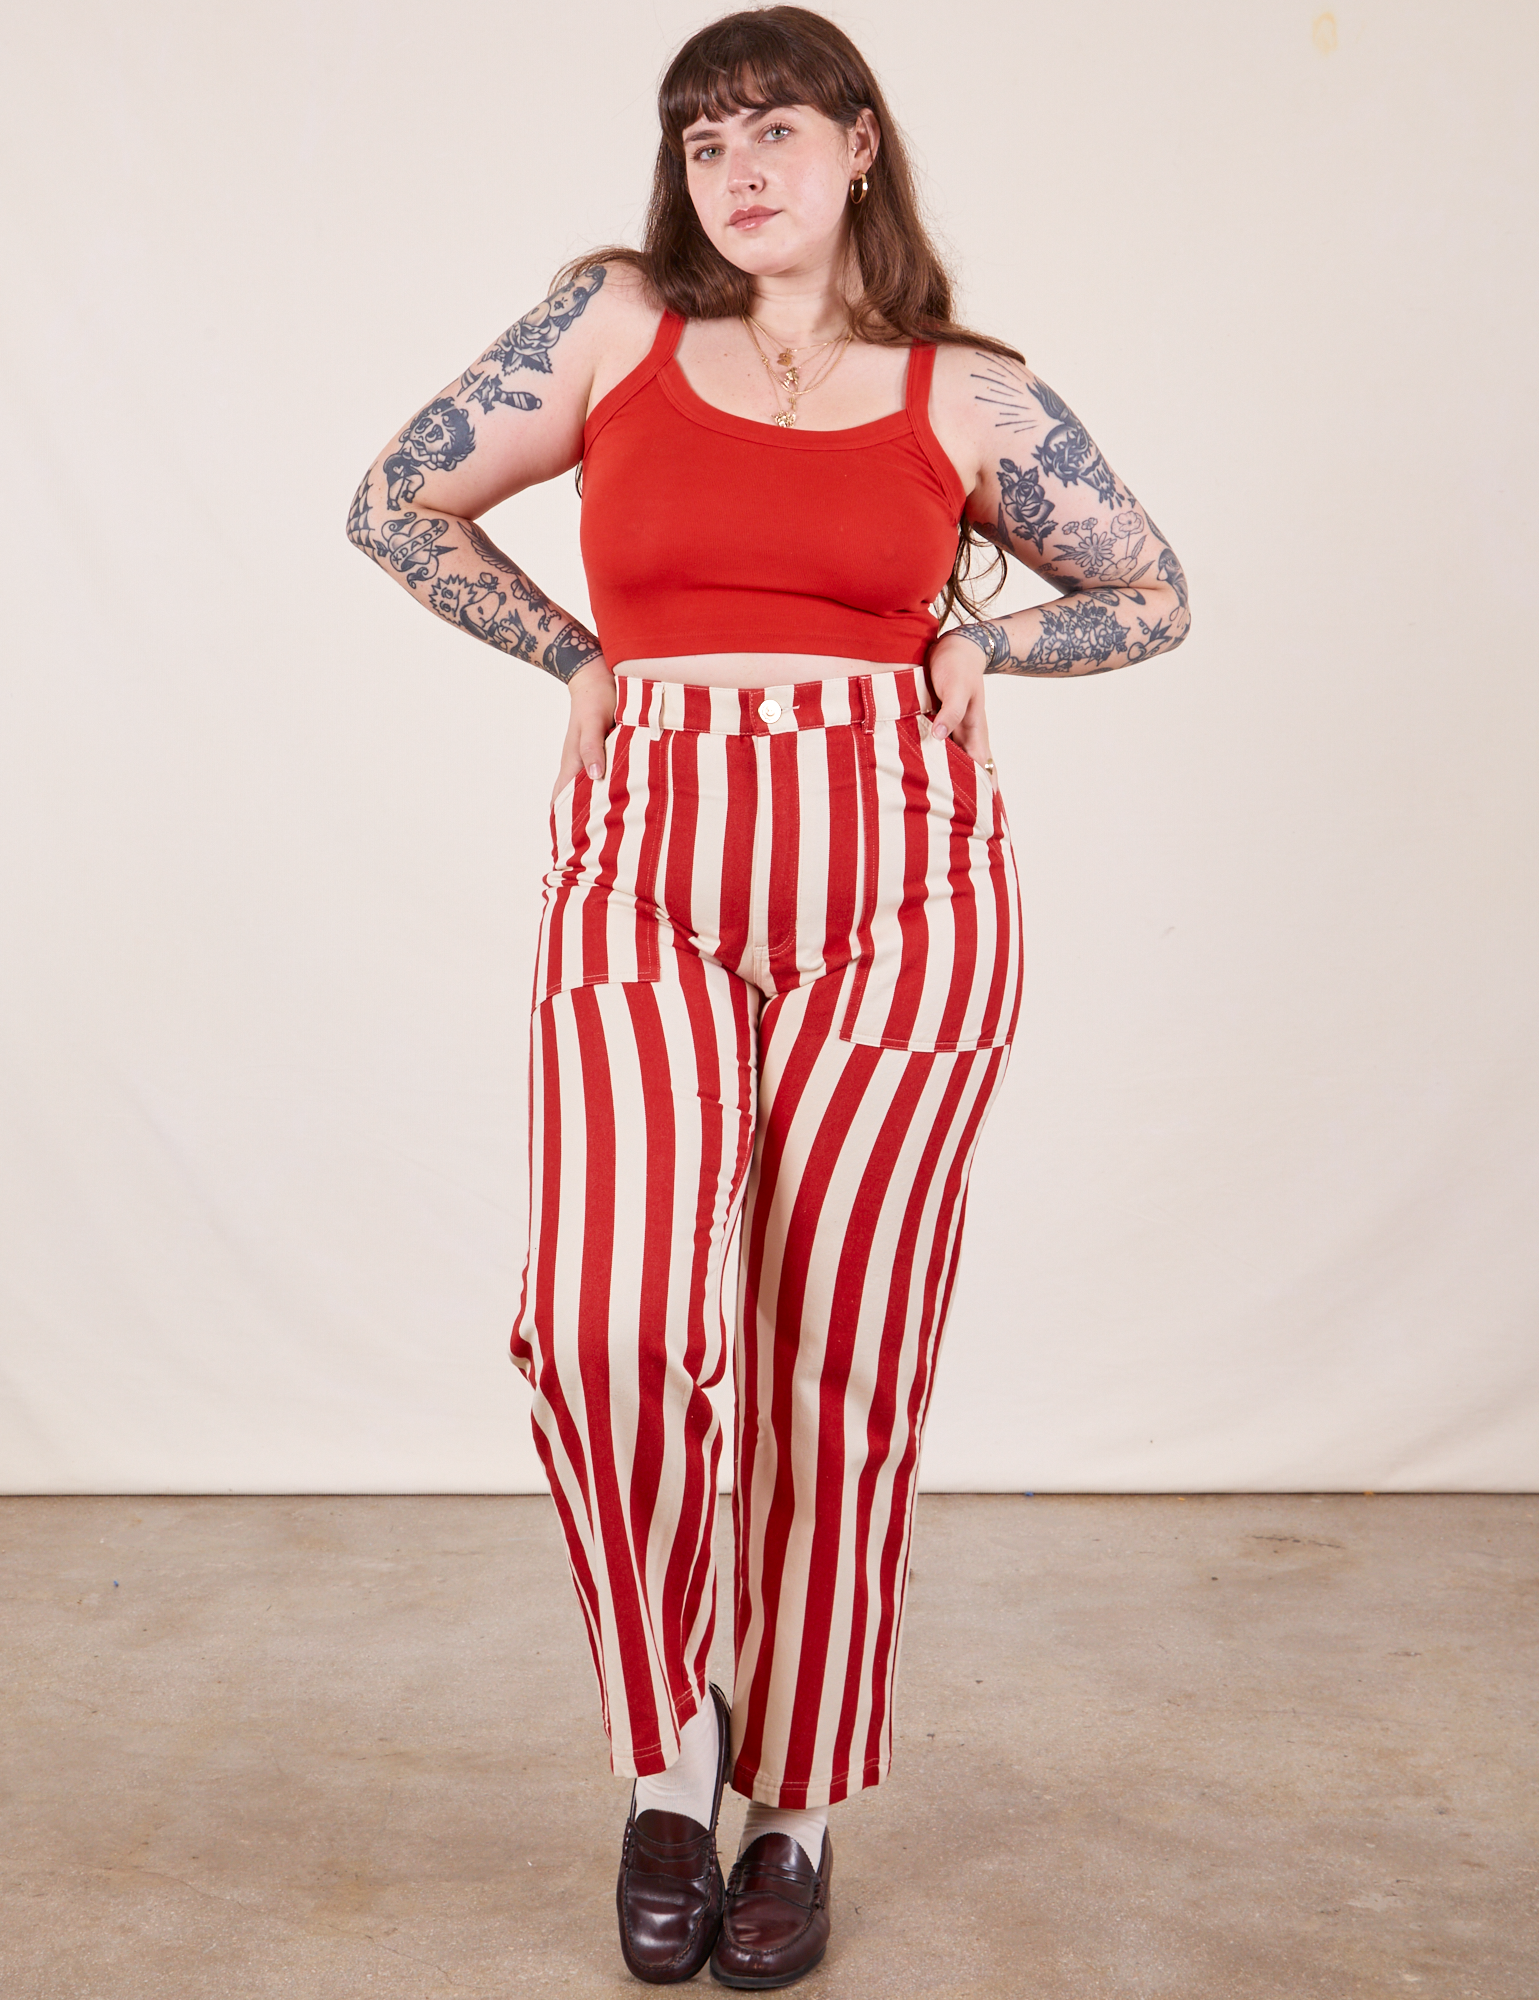 Sydney is 5&#39;9&quot; and wearing L Work Pants in Cherry Stripe paired with mustang red Cropped Cami